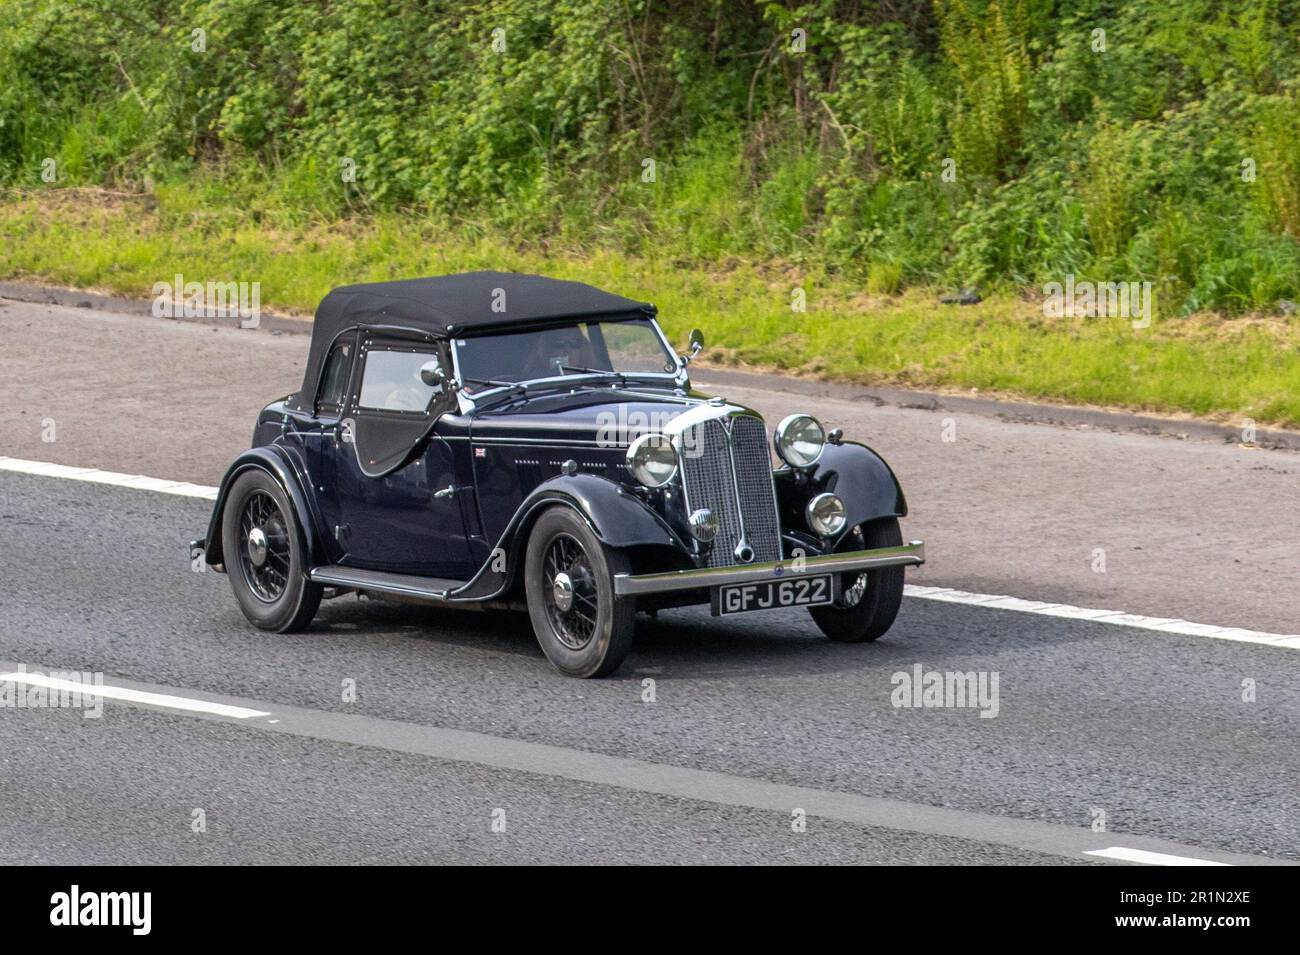 1935 Rover 12 Hp Petrol 1486 cc, Rover 10-12 was the fourth model Rover made; travelling on the M61 motorway UK Stock Photo